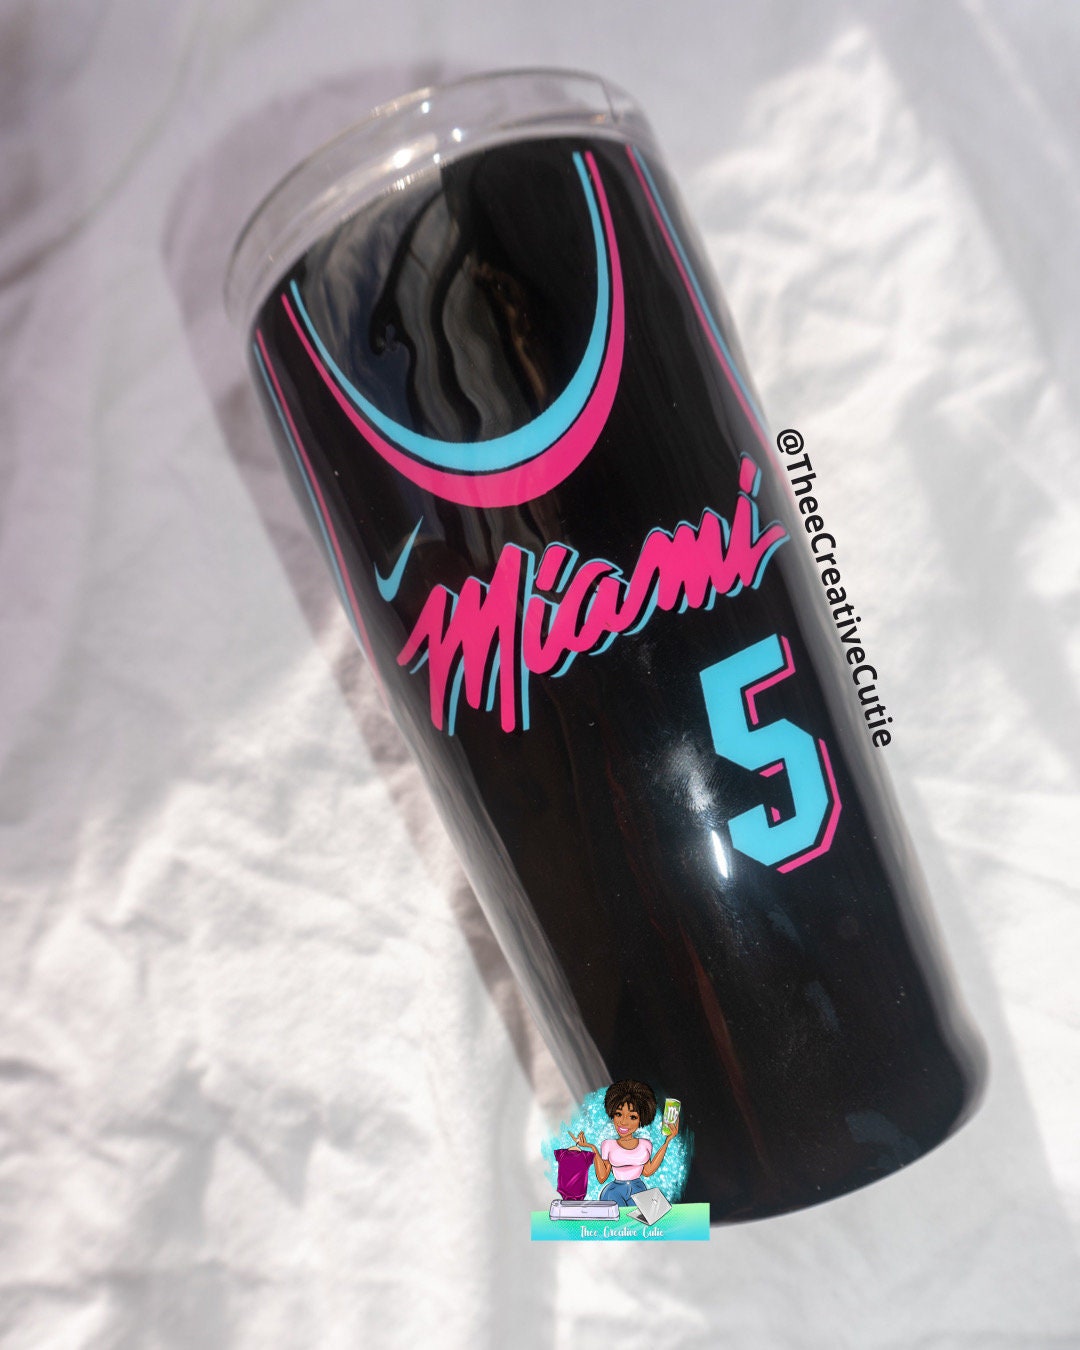 Miami Heat Vice Gifts & Merchandise for Sale